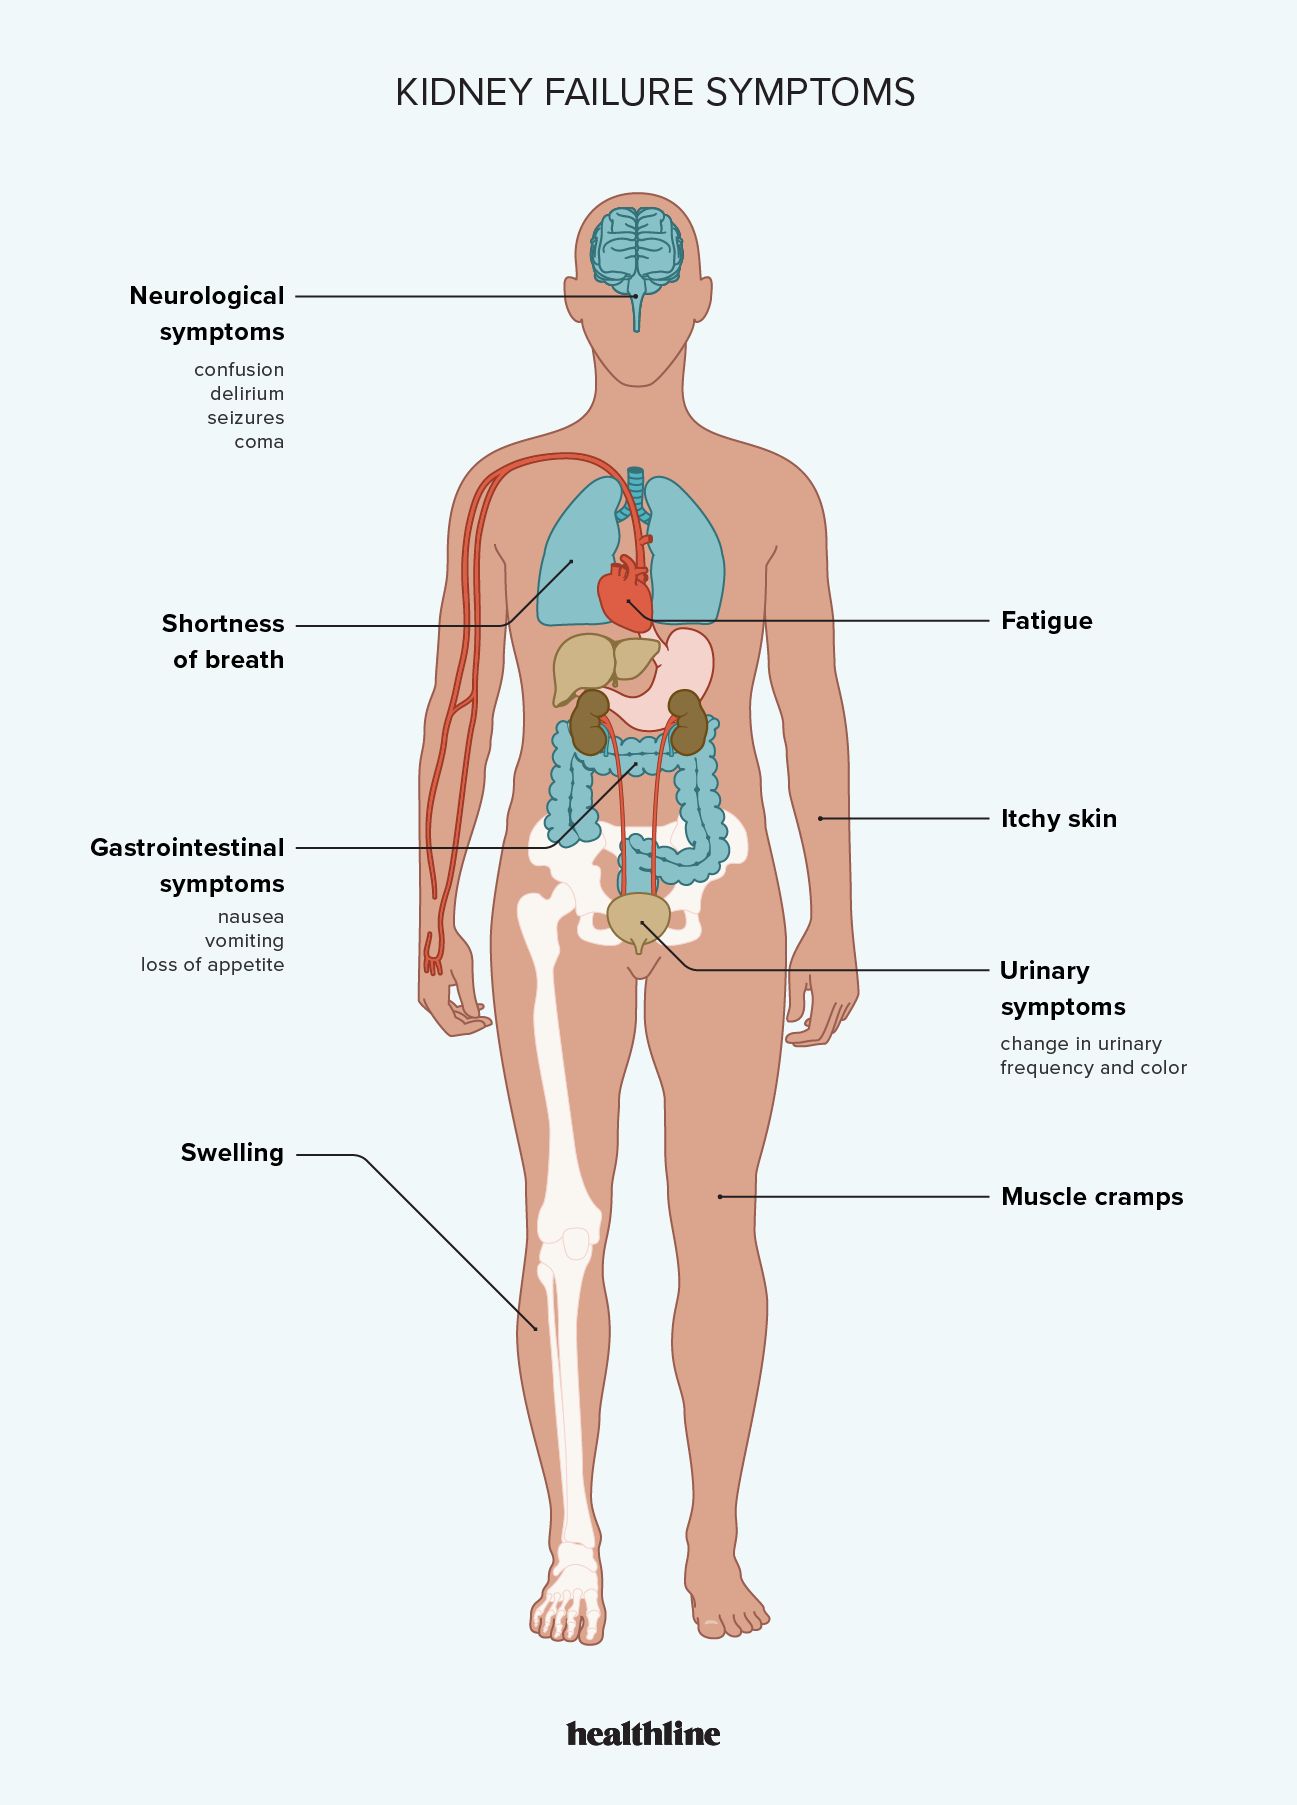 effects of kidney failure on various parts of the human body